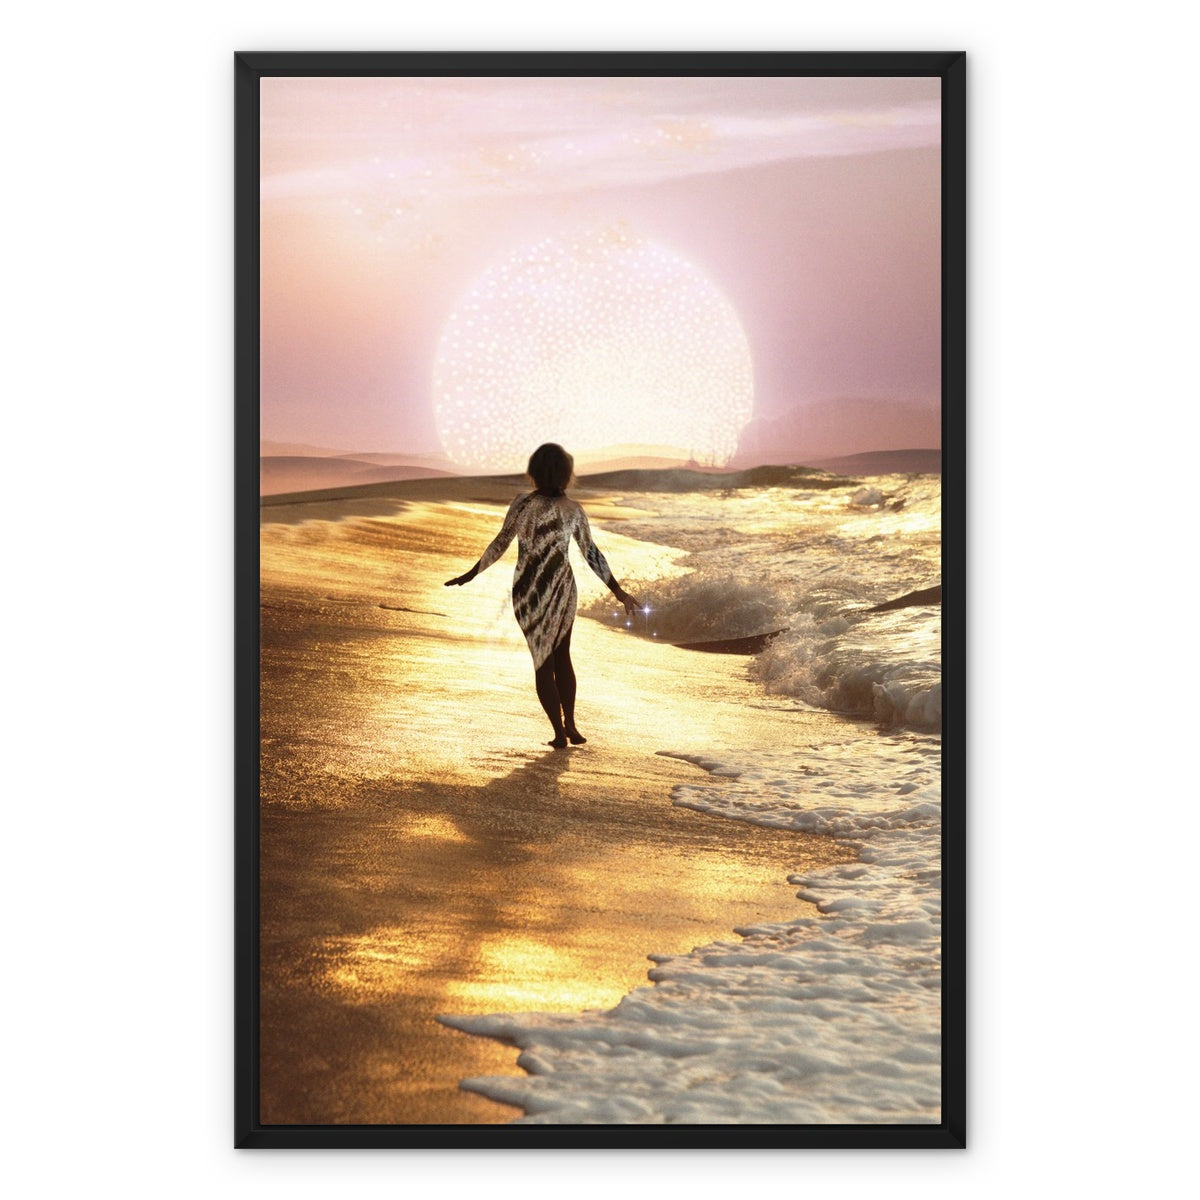 Total Bliss Framed Canvas - Starseed Designs Inc.